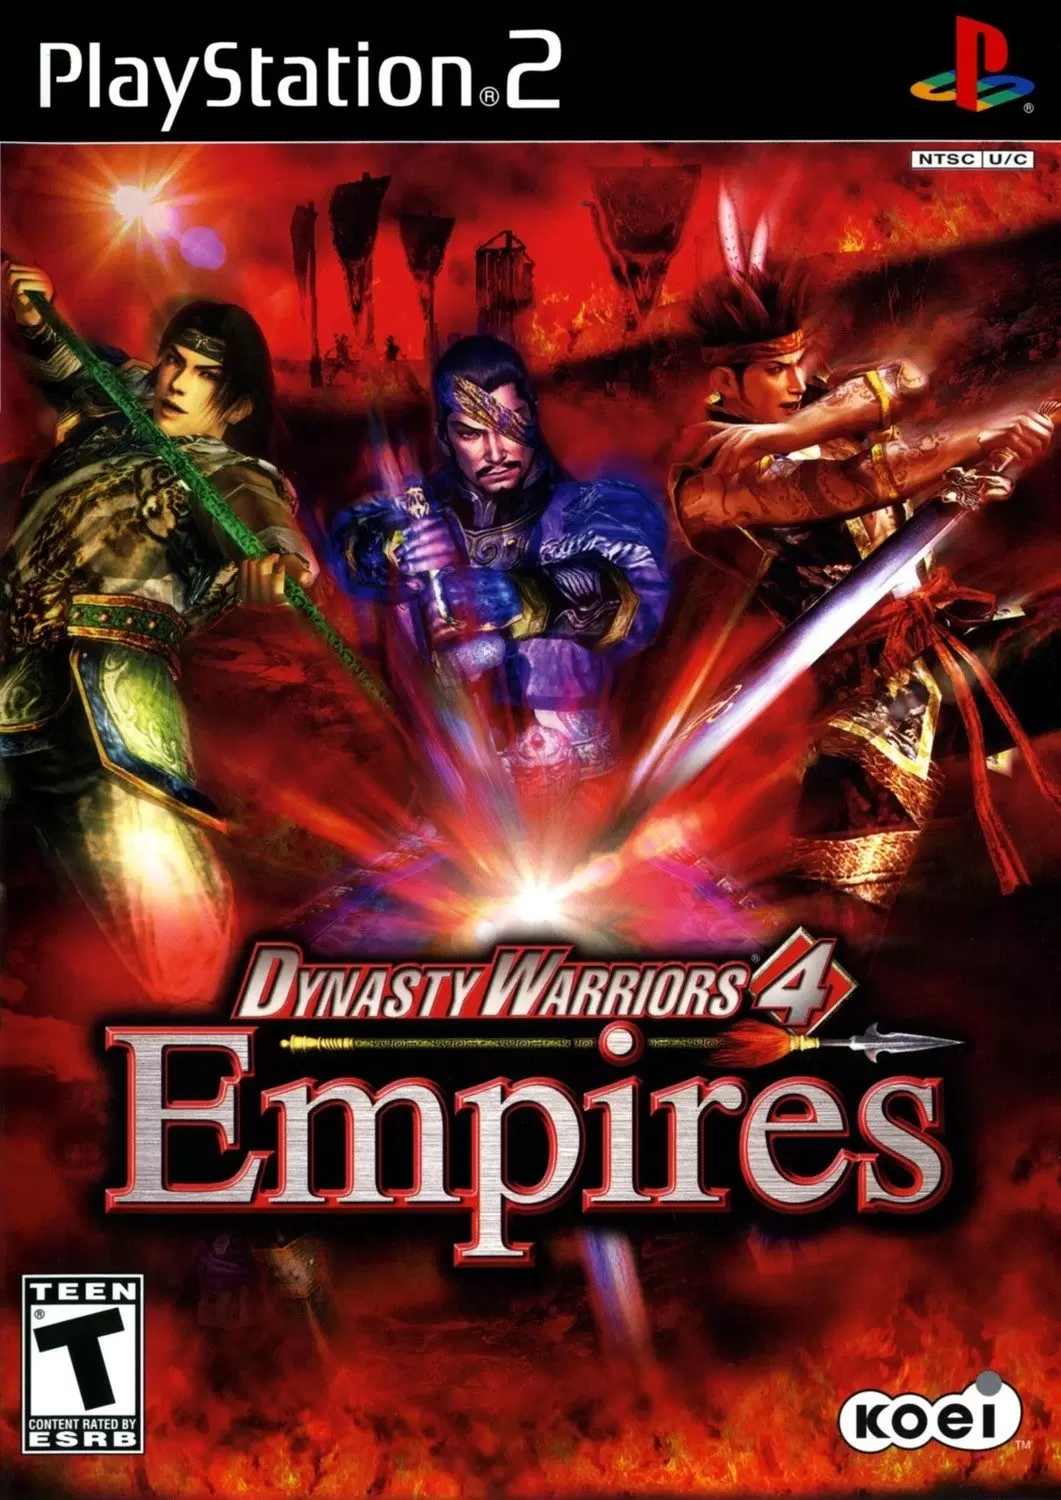 PS2 Games - Dynasty Warriors 4: Empires